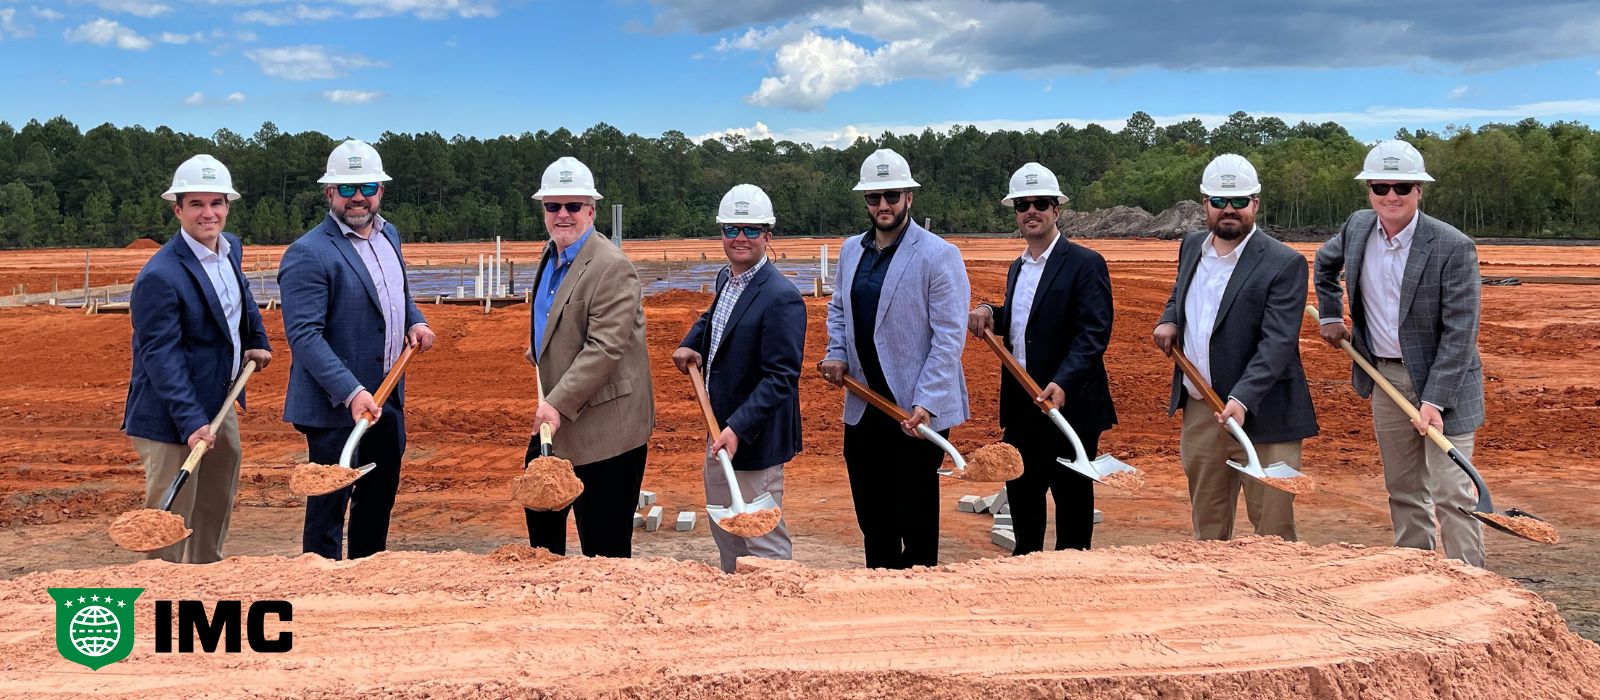 IMC Breaks Ground on New Facility in Mobile, AL